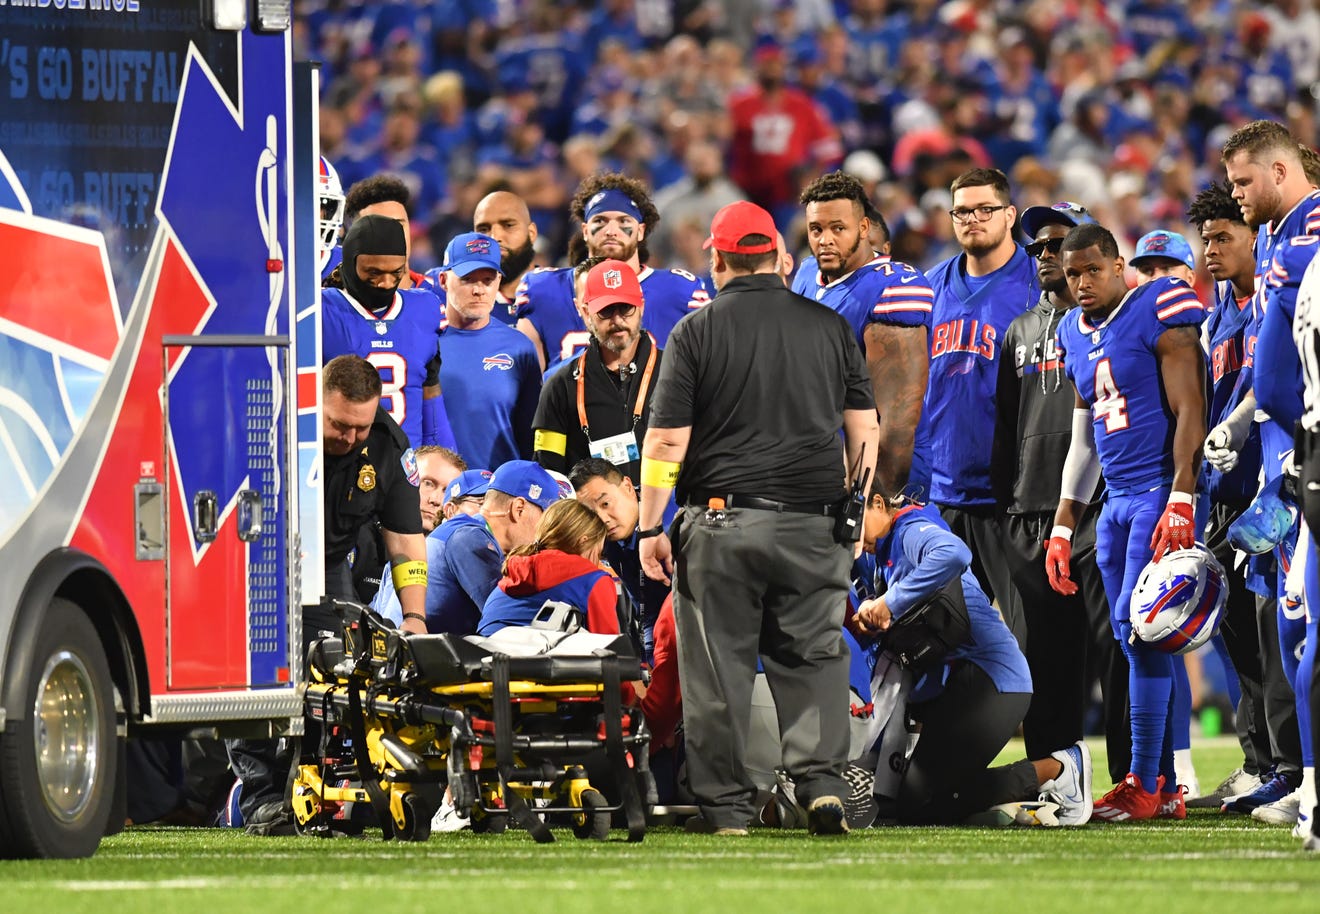 Buffalo Bills injury report for Week 3 looks troublesome on defense